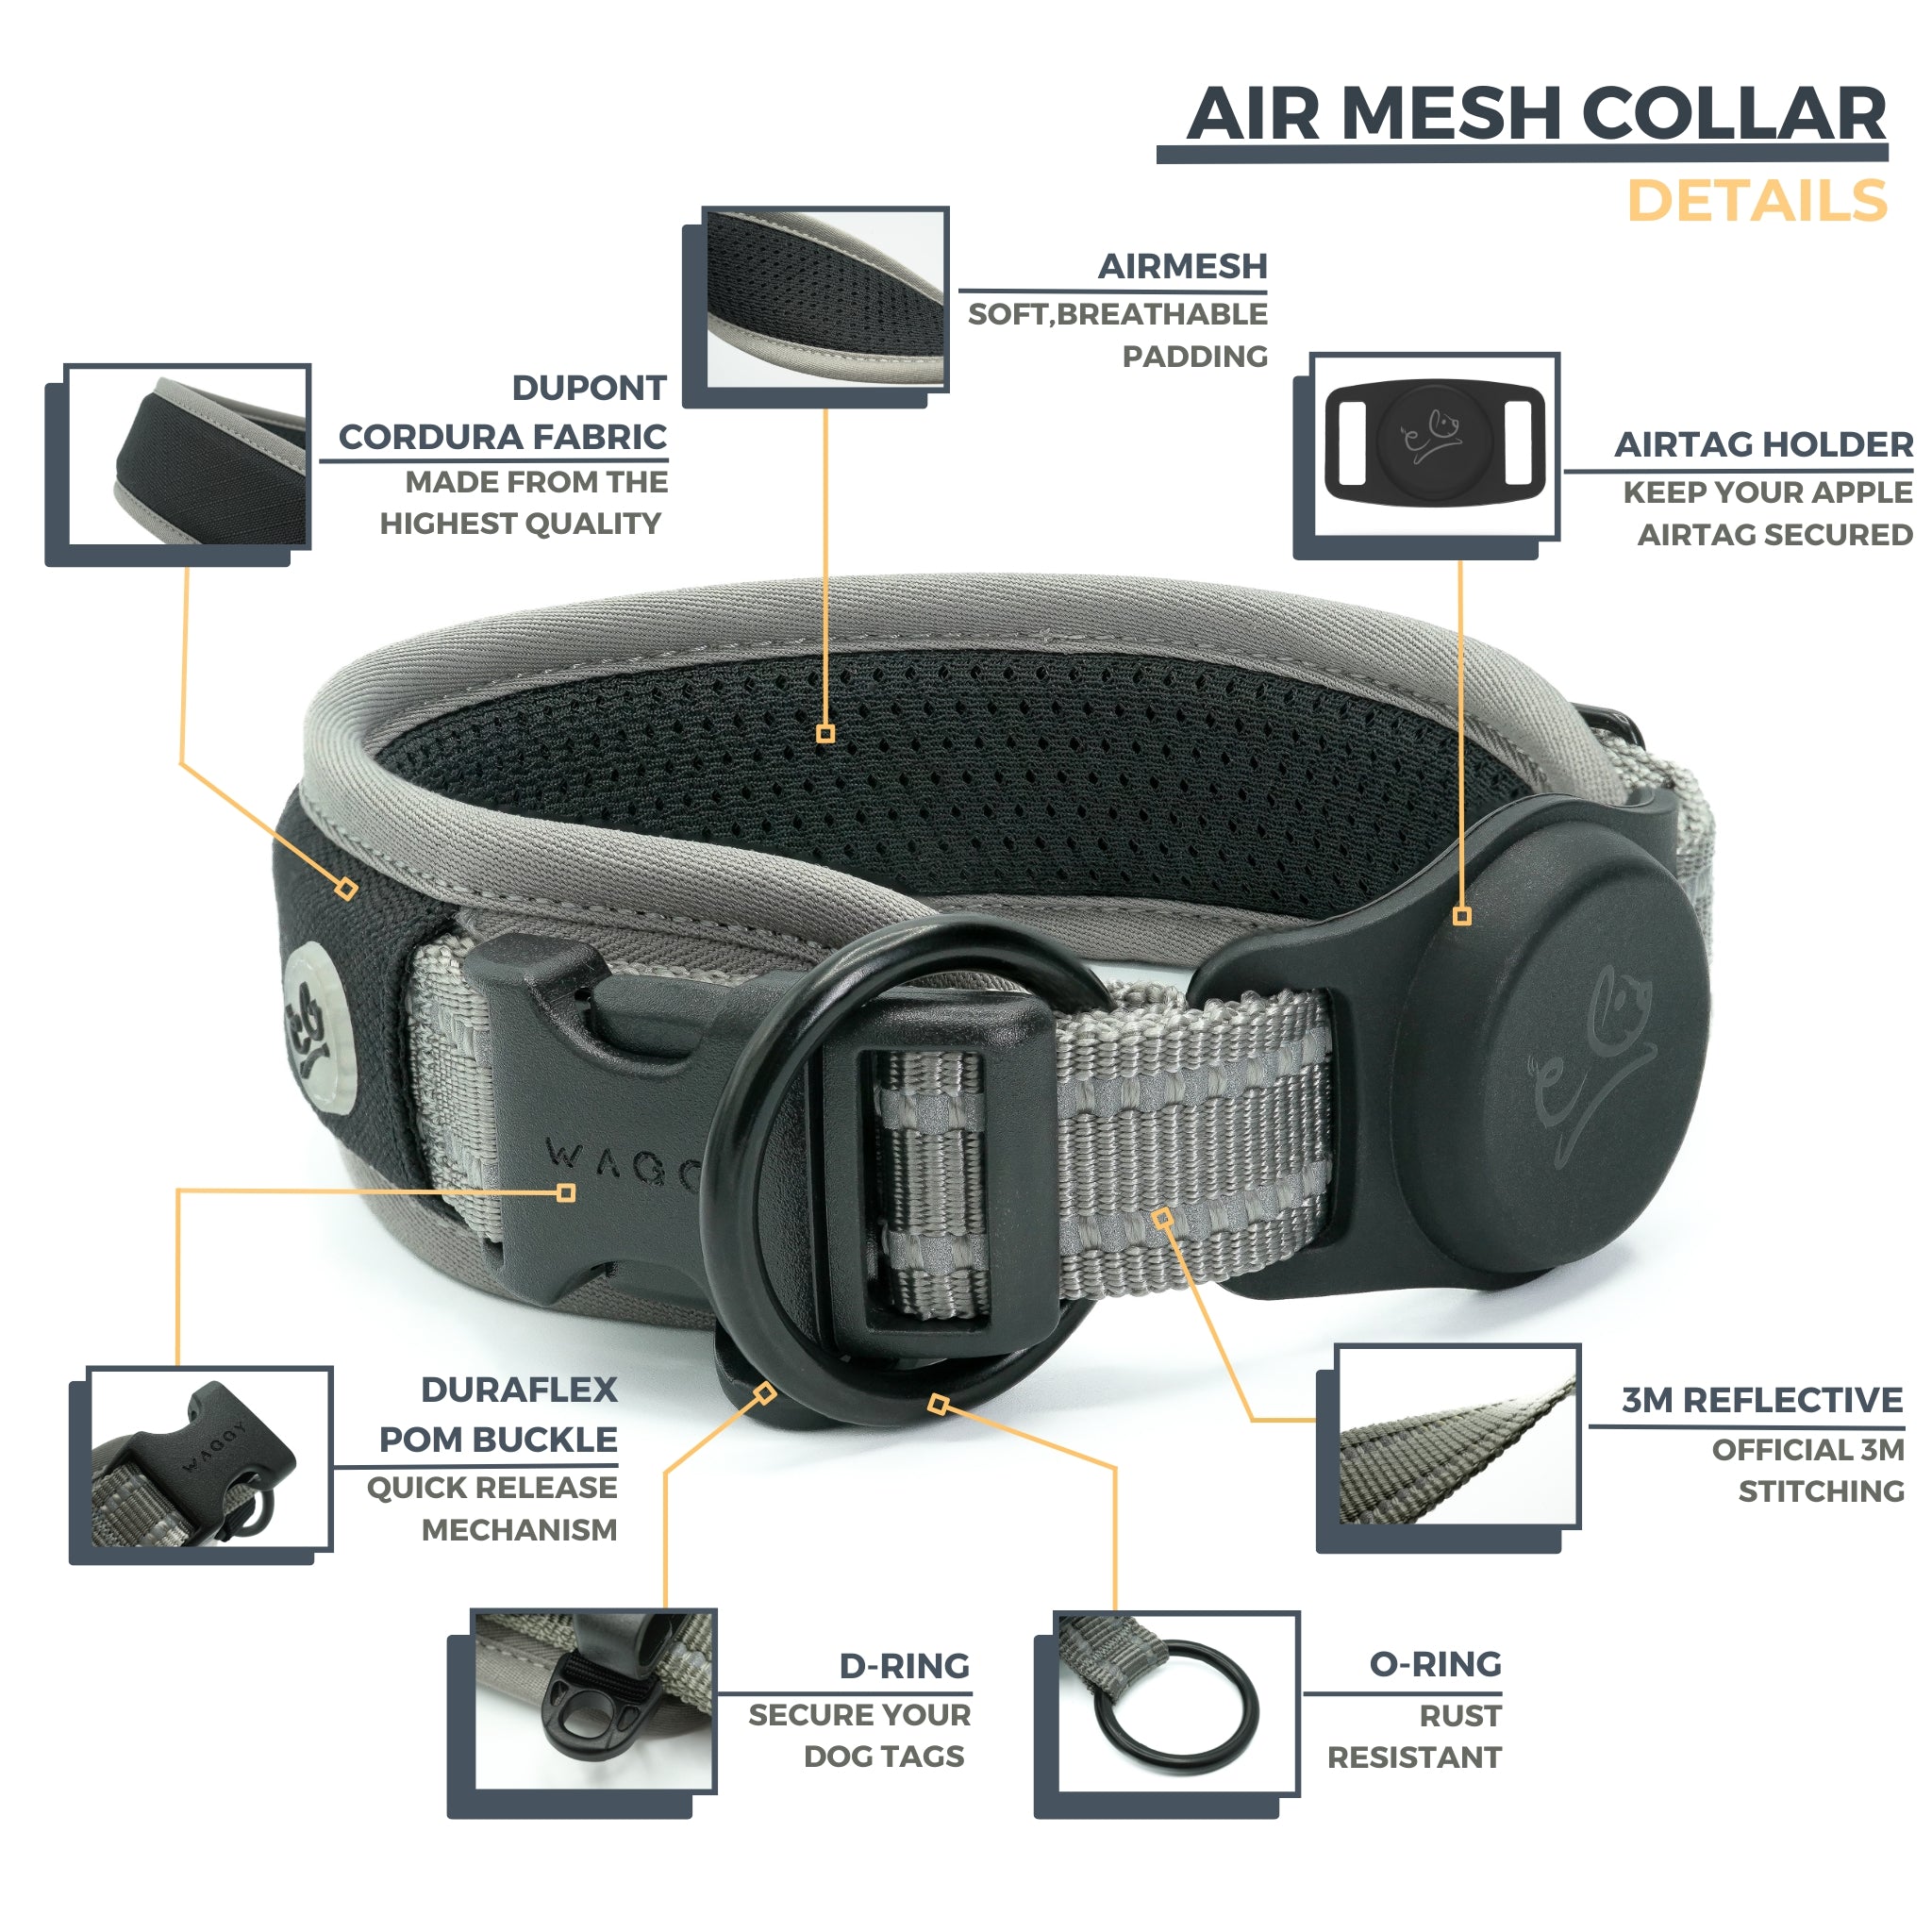 7 features & details regarding Grey Air Mesh dog collar. Dupont Cordura Fabric; Air Mesh padding; Airtag Holder; Duraflex buckle; D-ring; O-ring; 3M Reflective stitching with short description and close up images.